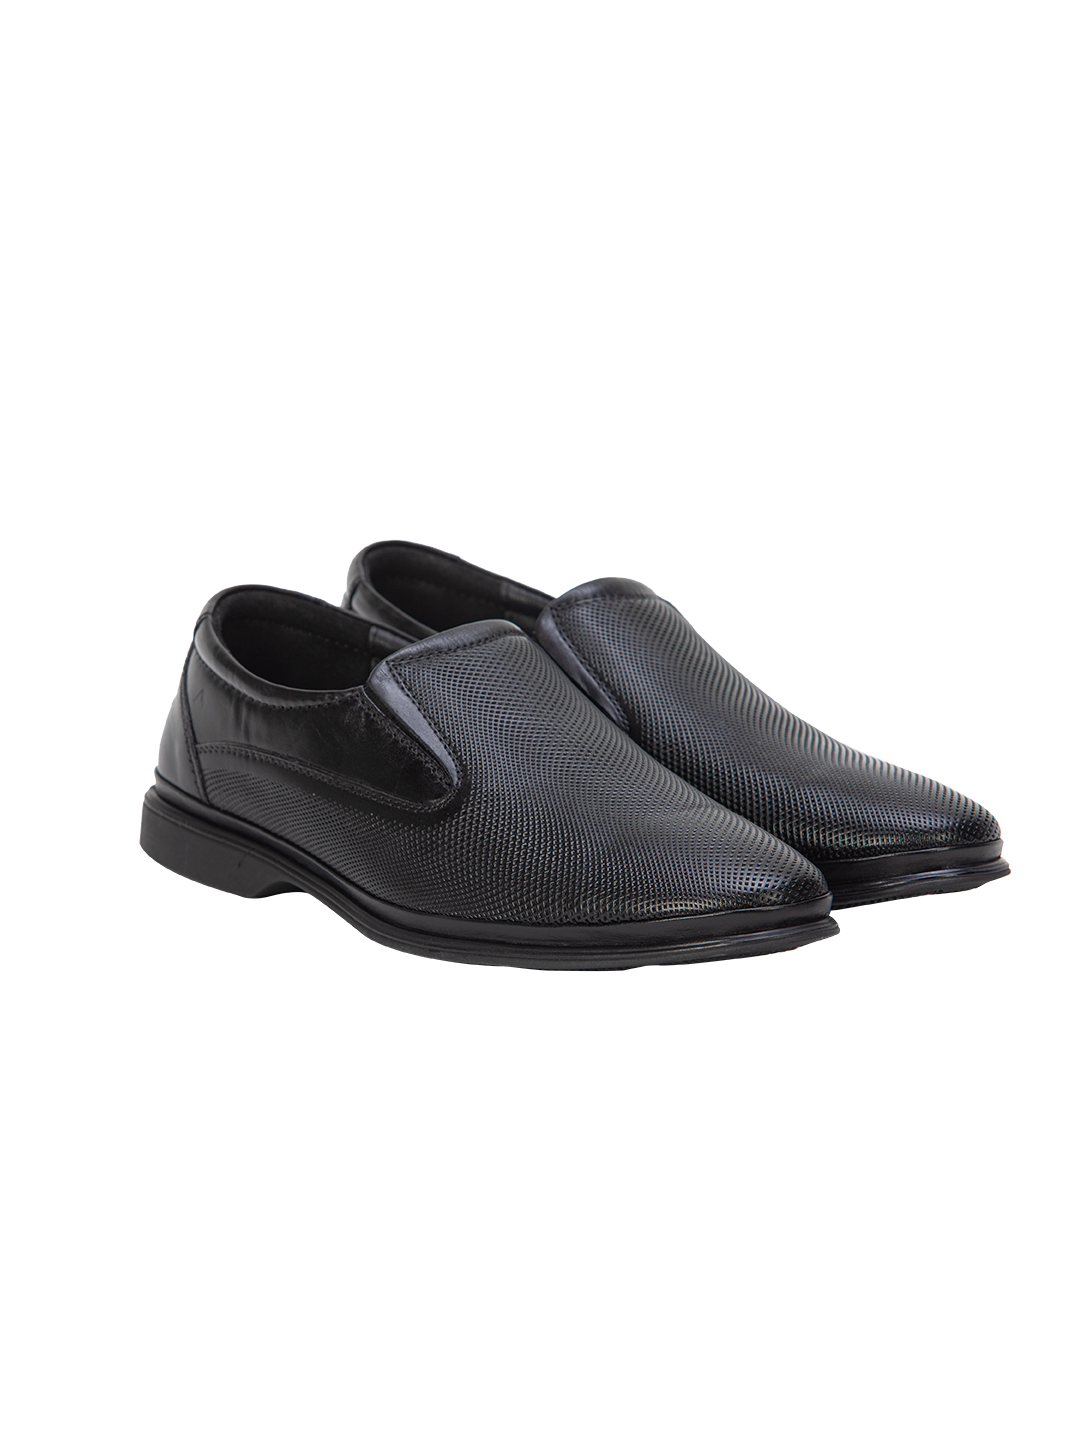 Buy Von Wellx Germany Comfort Mondaine Casual Black Shoes Online in Rajasthan